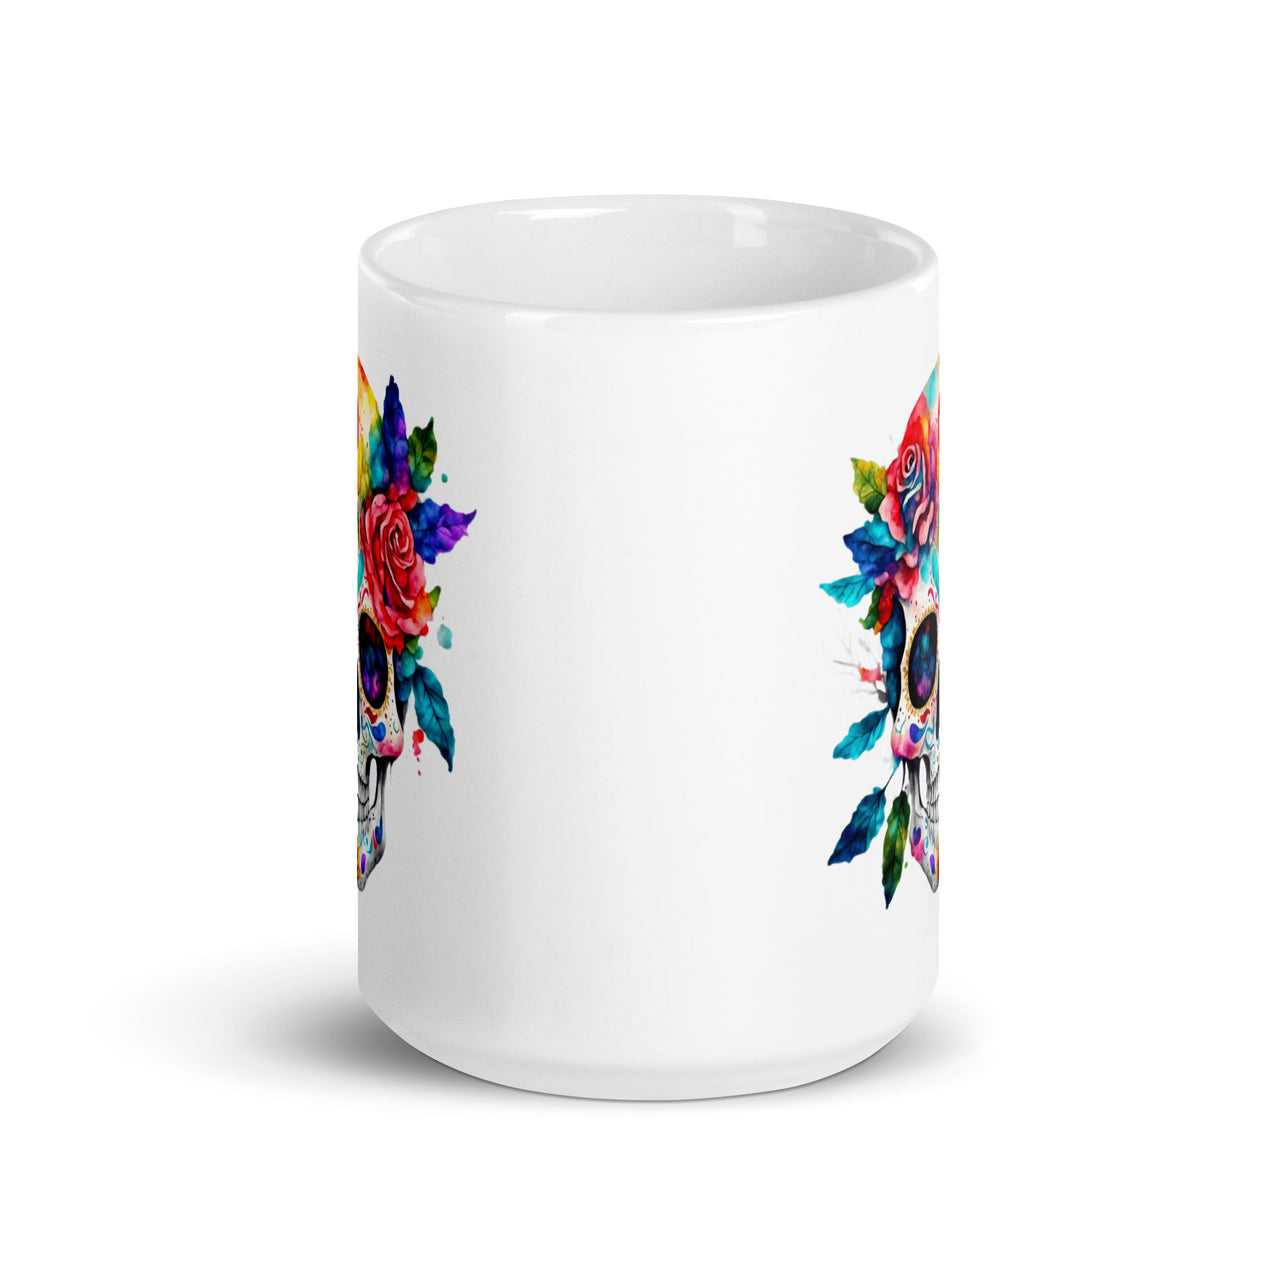 Day Of The Dead Colorful Sugar Skull Gift Mug White Coffee Cup-White